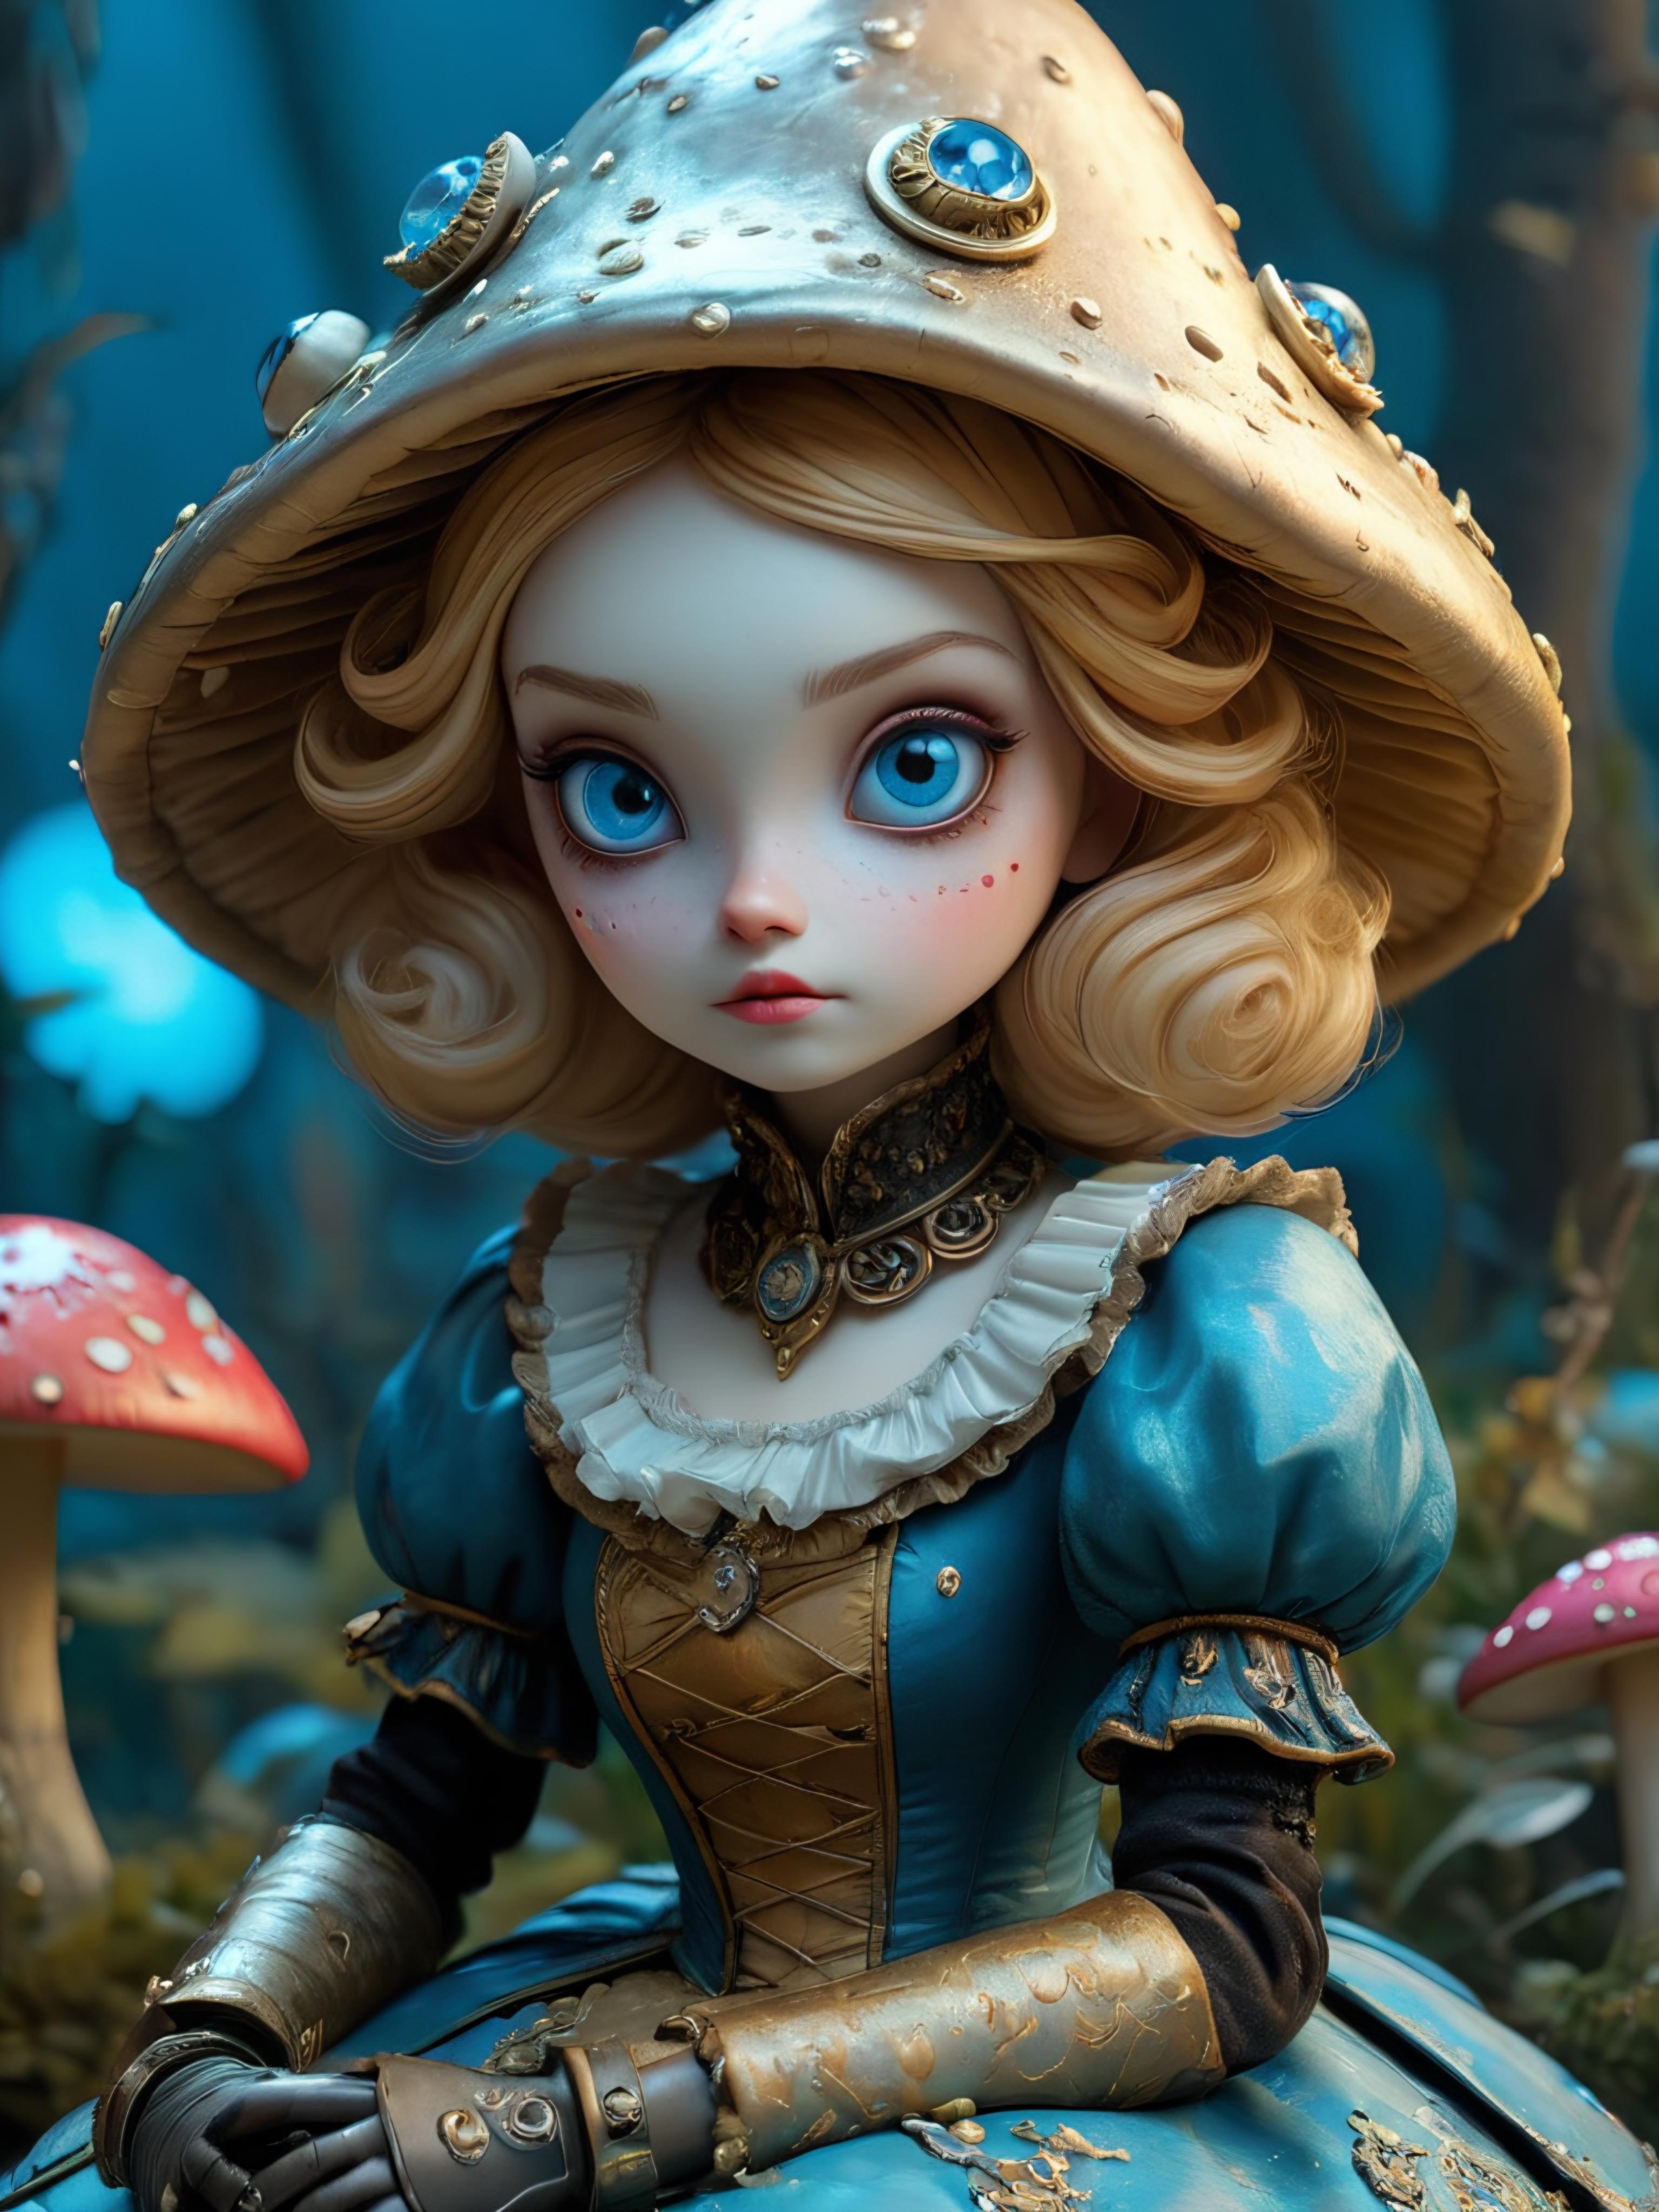 A doll with blue eyes wearing a blue dress and a hat.